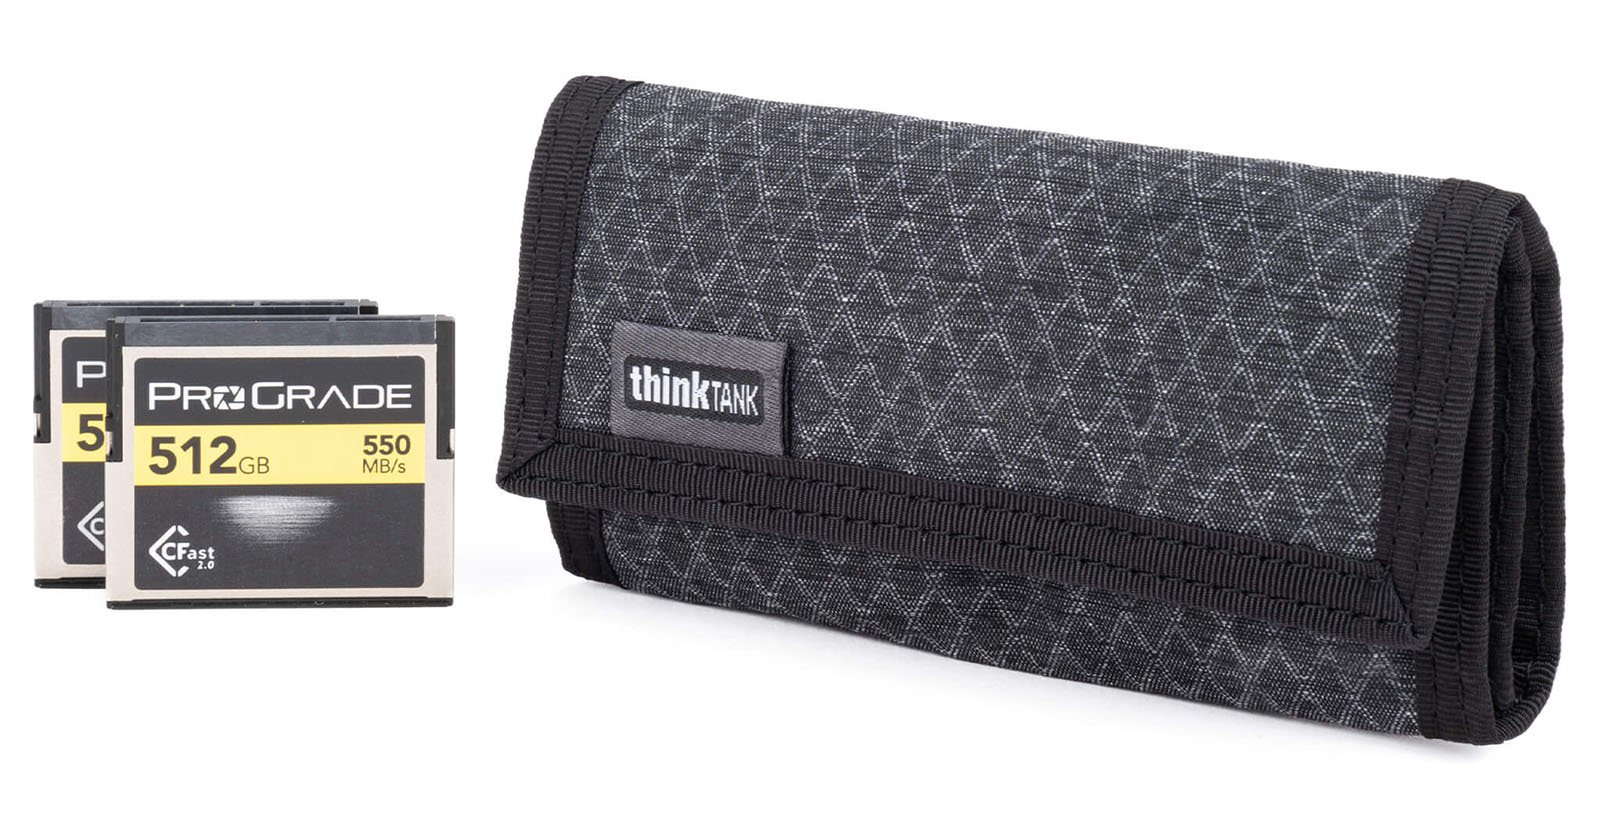 Think Tanks Updated Memory Card Wallets Protect Your Precious Photos